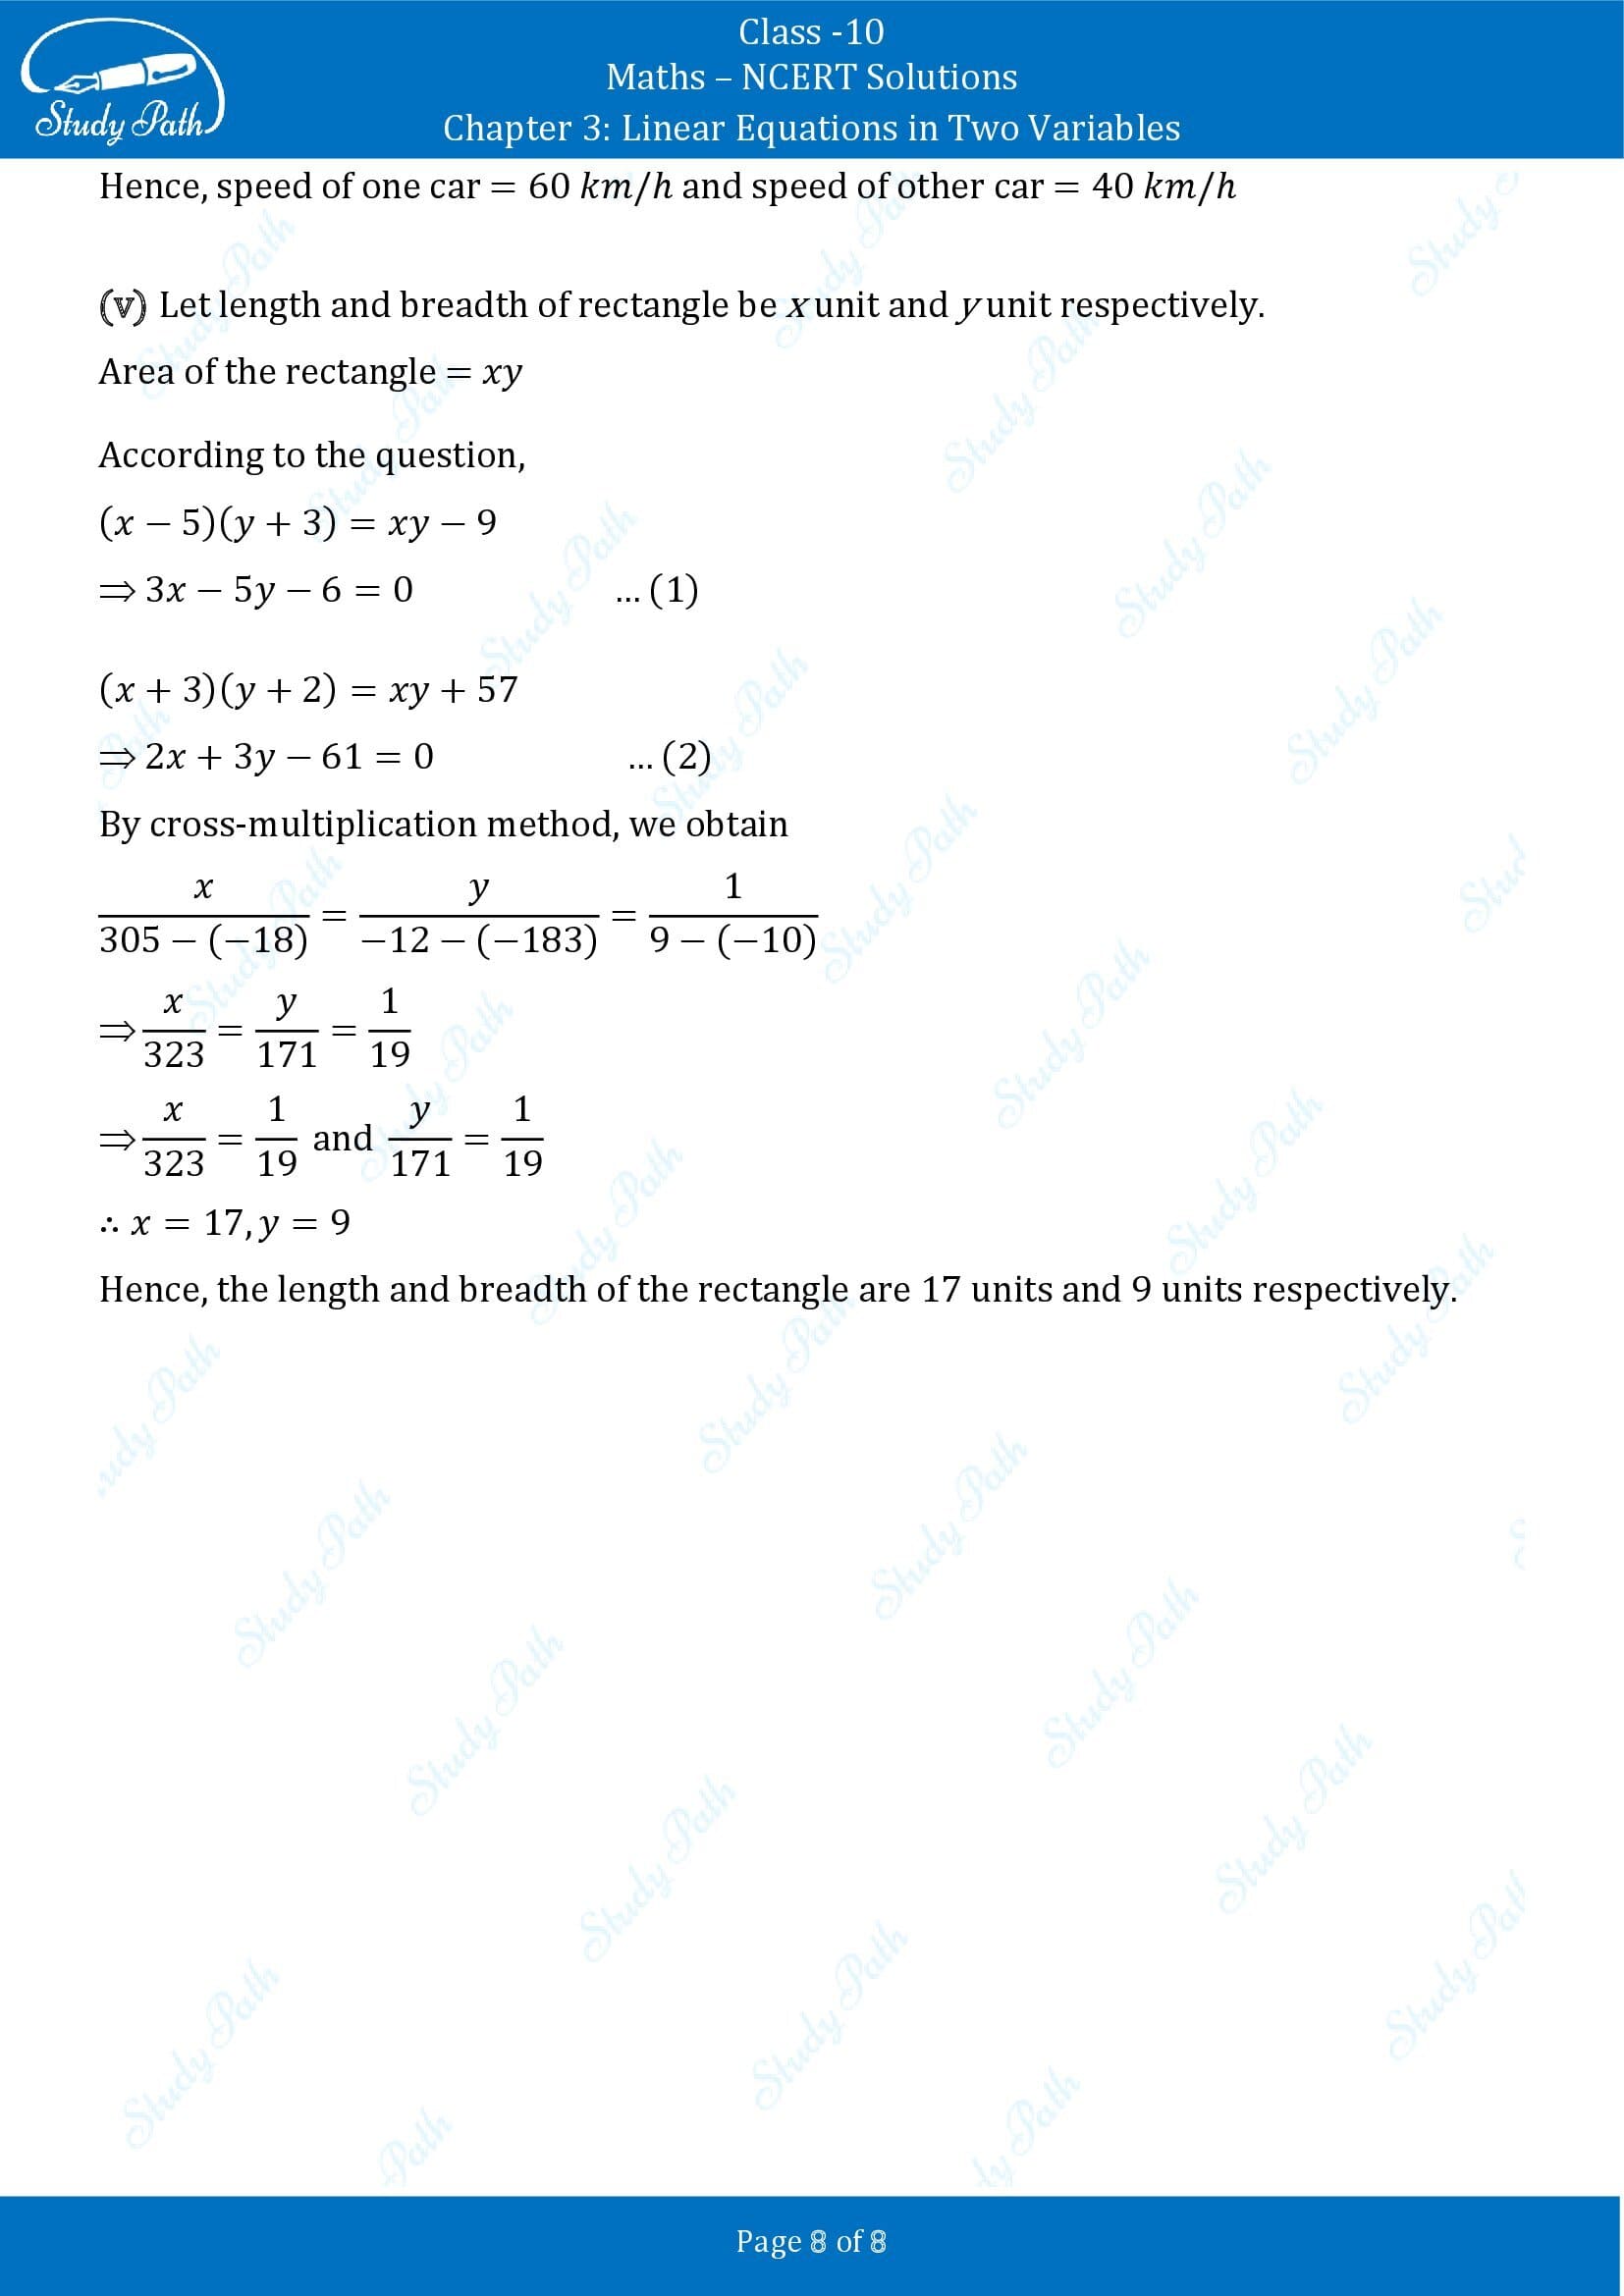 NCERT Solutions for Class 10 Maths Chapter 3 Linear Equations in Two Variables Exercise 3.5 00008